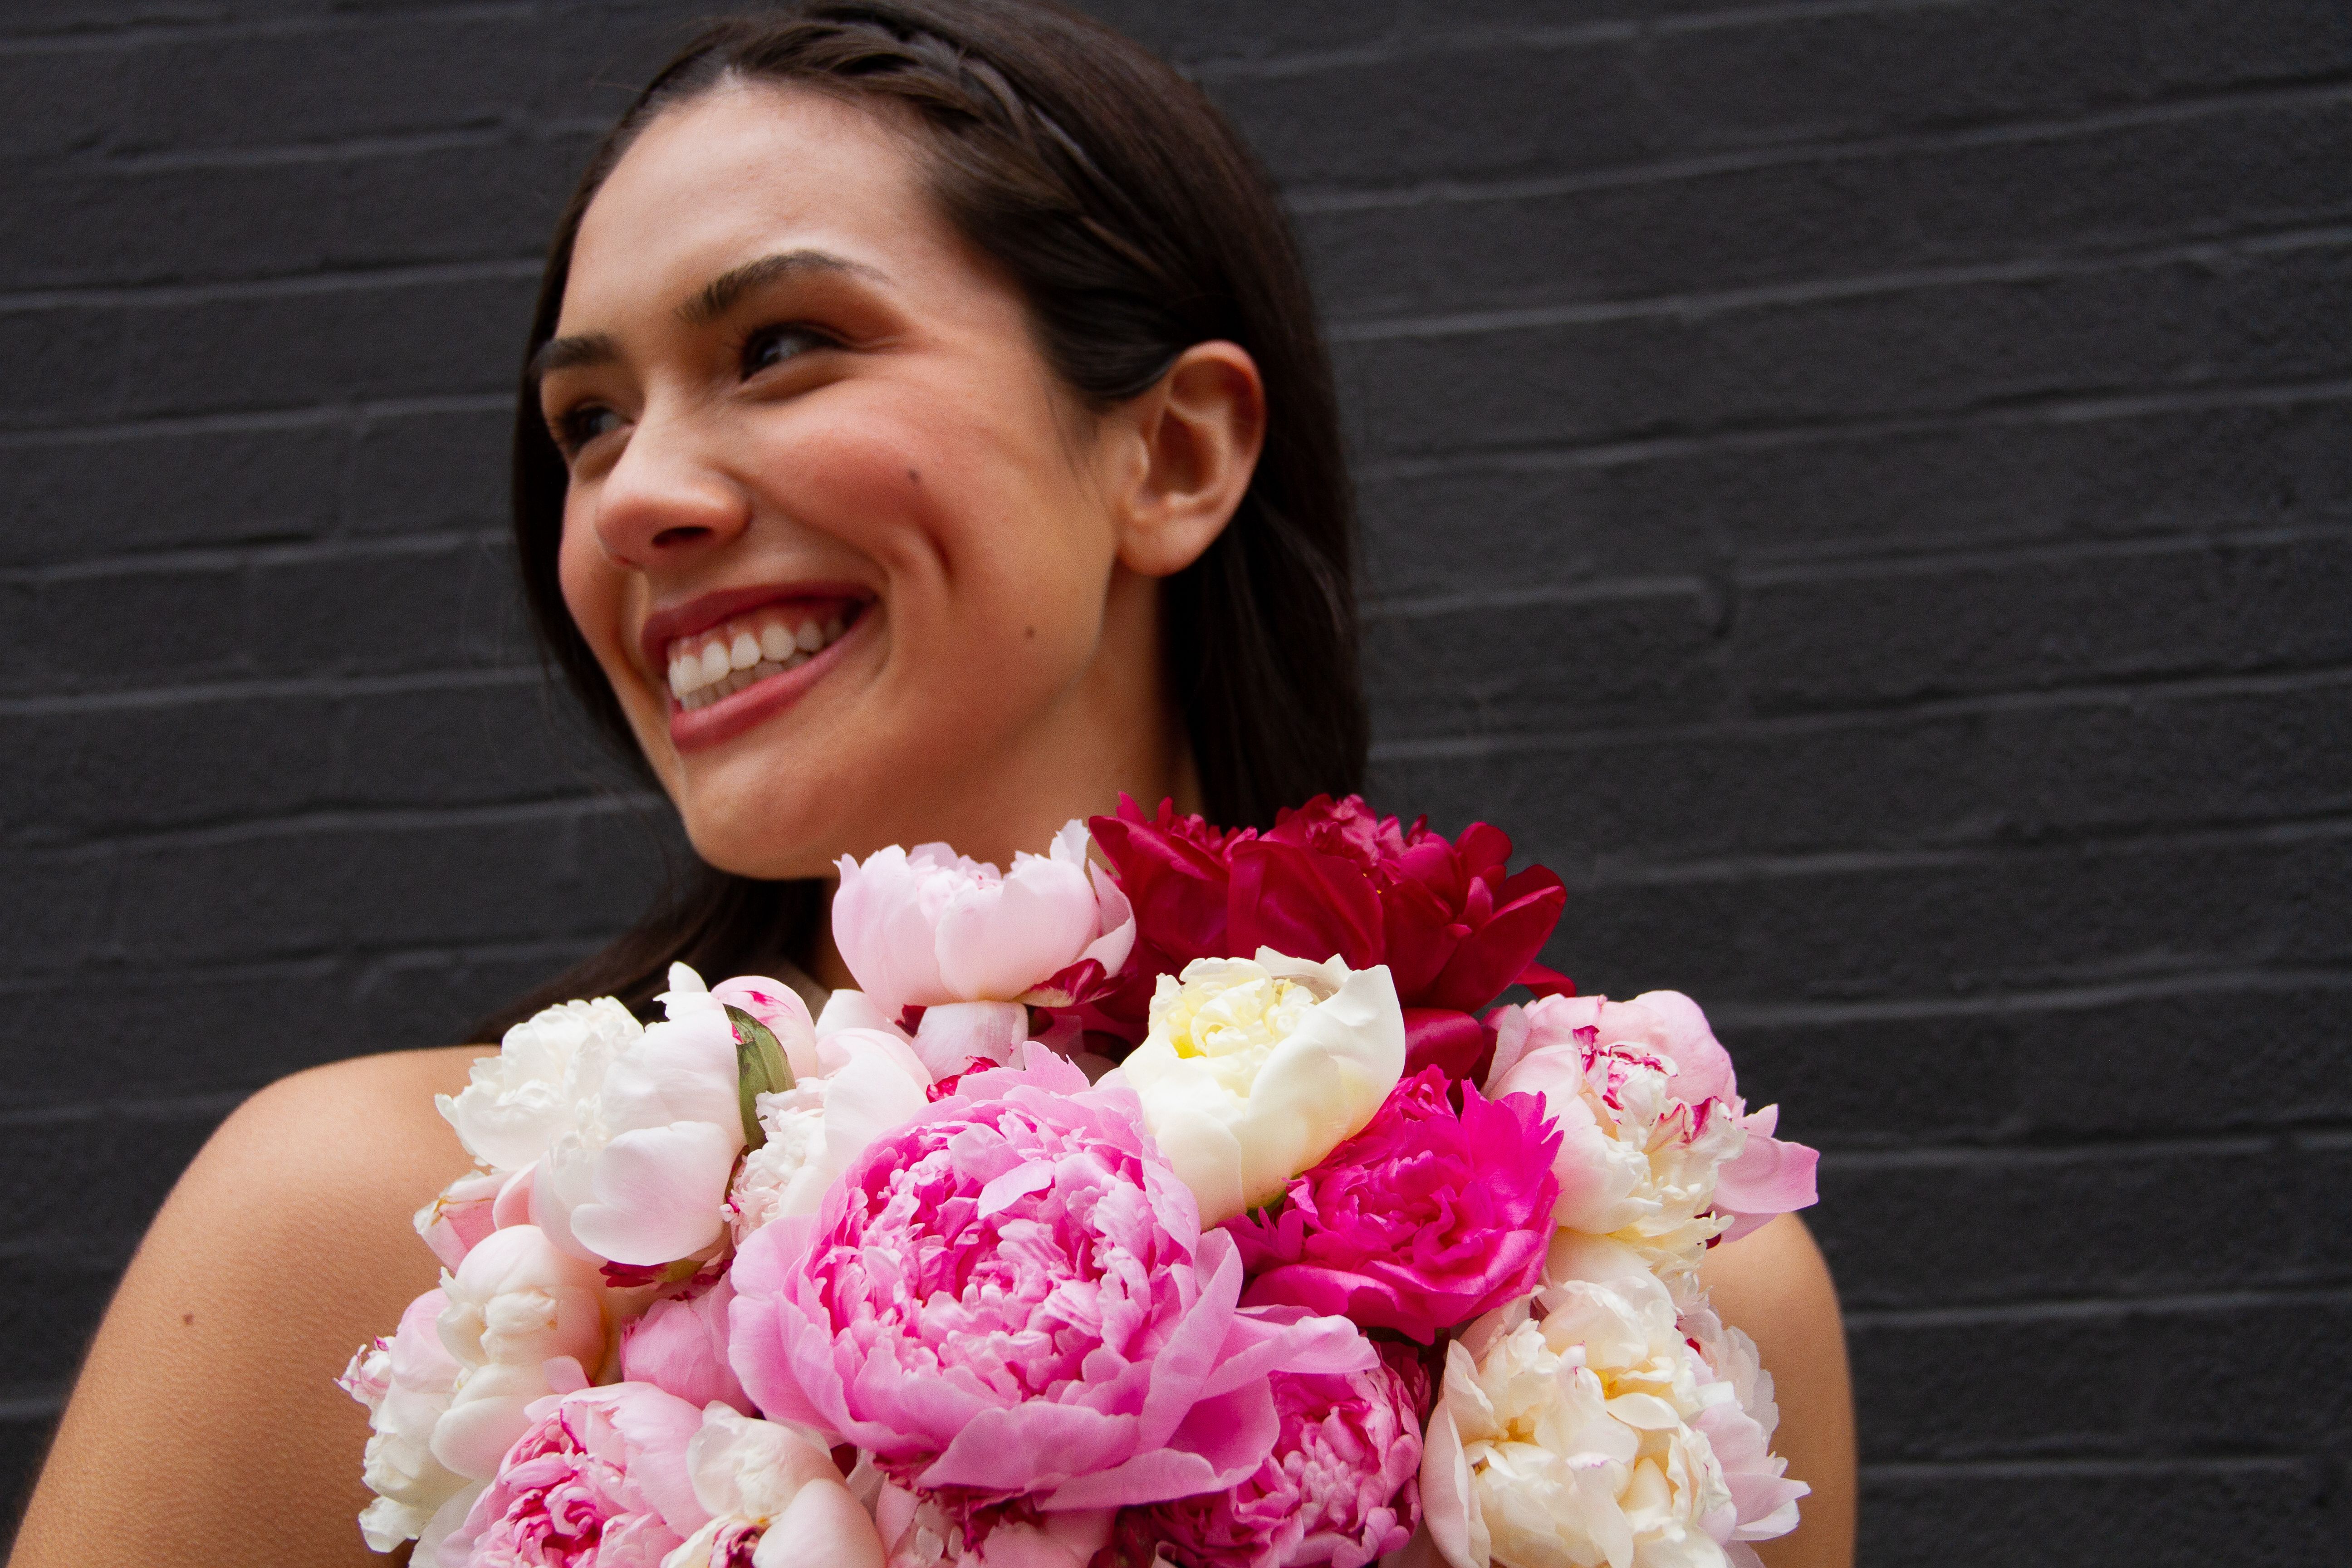 Close up of a woman holding a bouquet of white, red, and pink peonies.